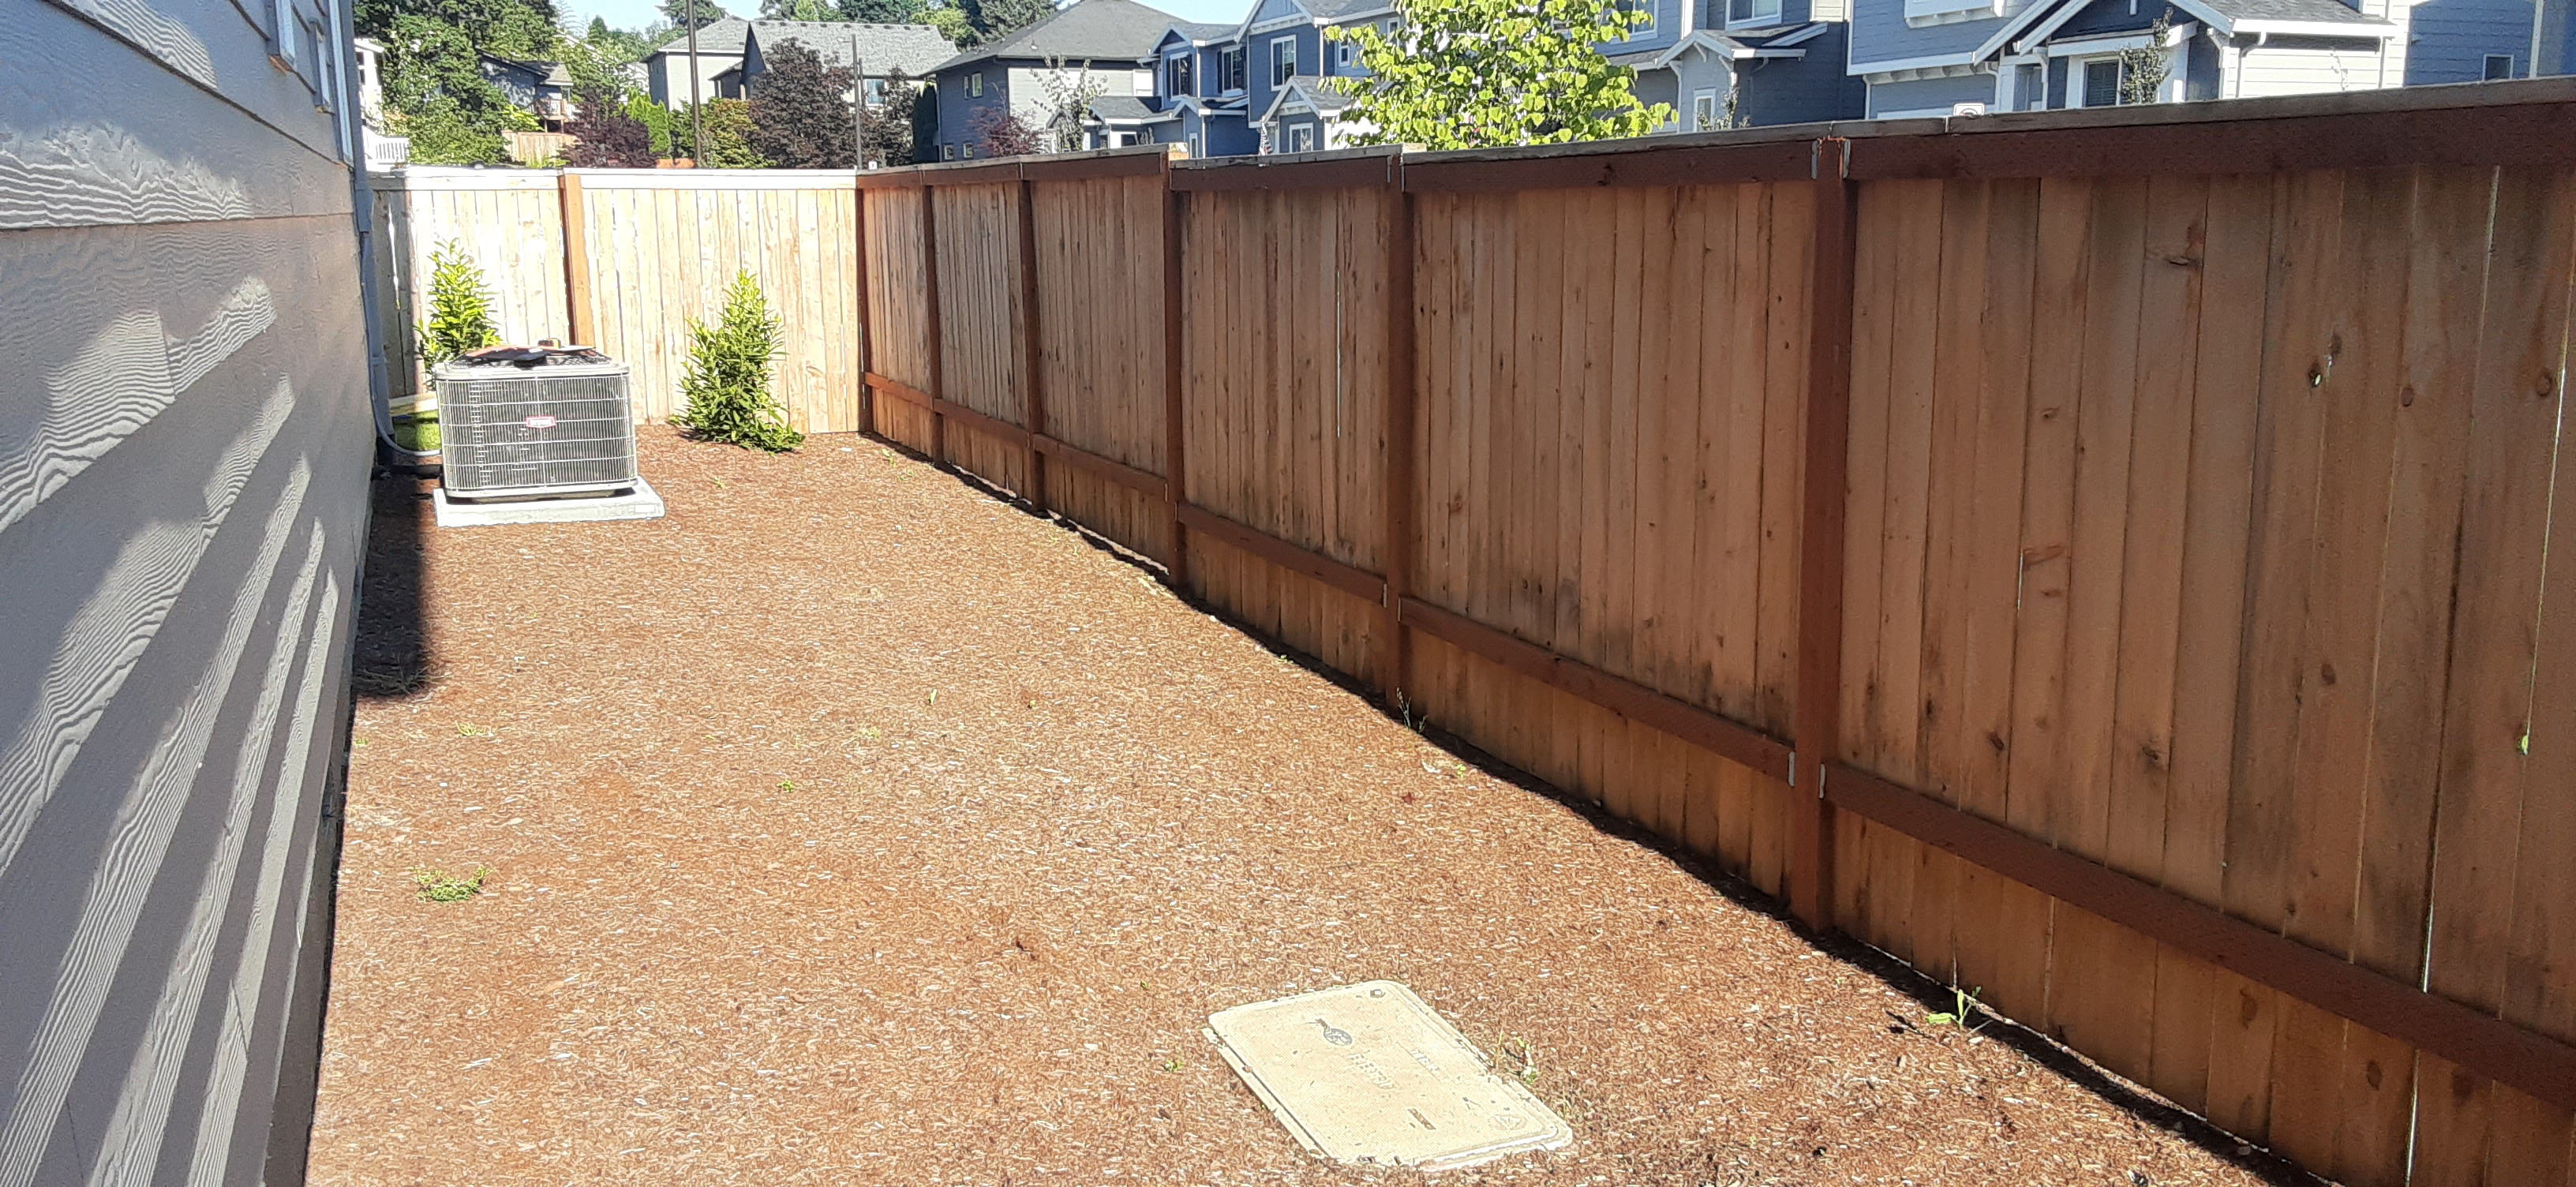 Empty backyard with wooden fence